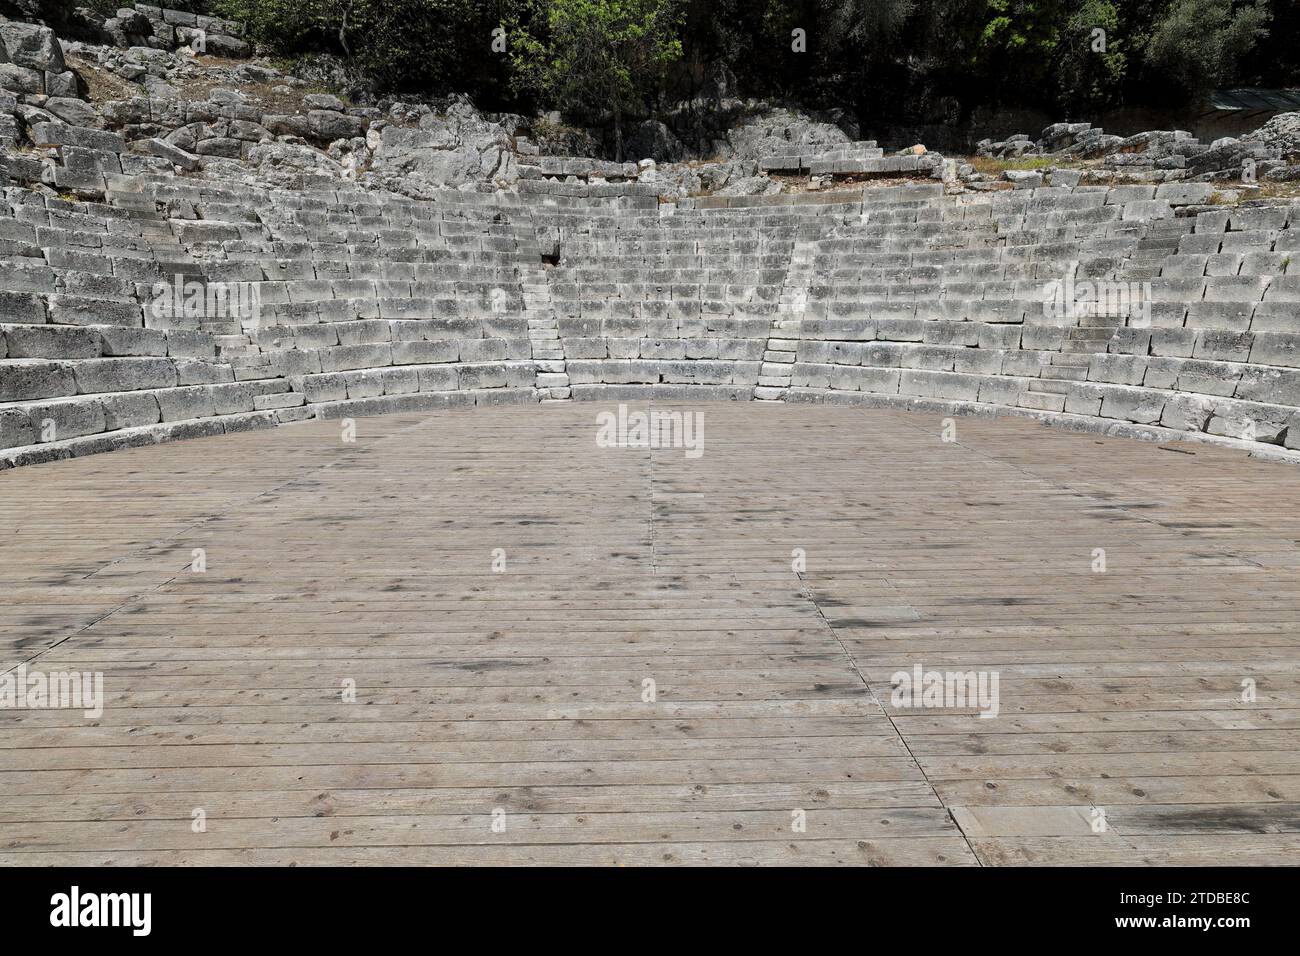 142 Cavea and orchestra, Hellenistic theatre dated in the mid-3rd.century BC, Butrint archaeological site. Vlore county-Albania. Stock Photo